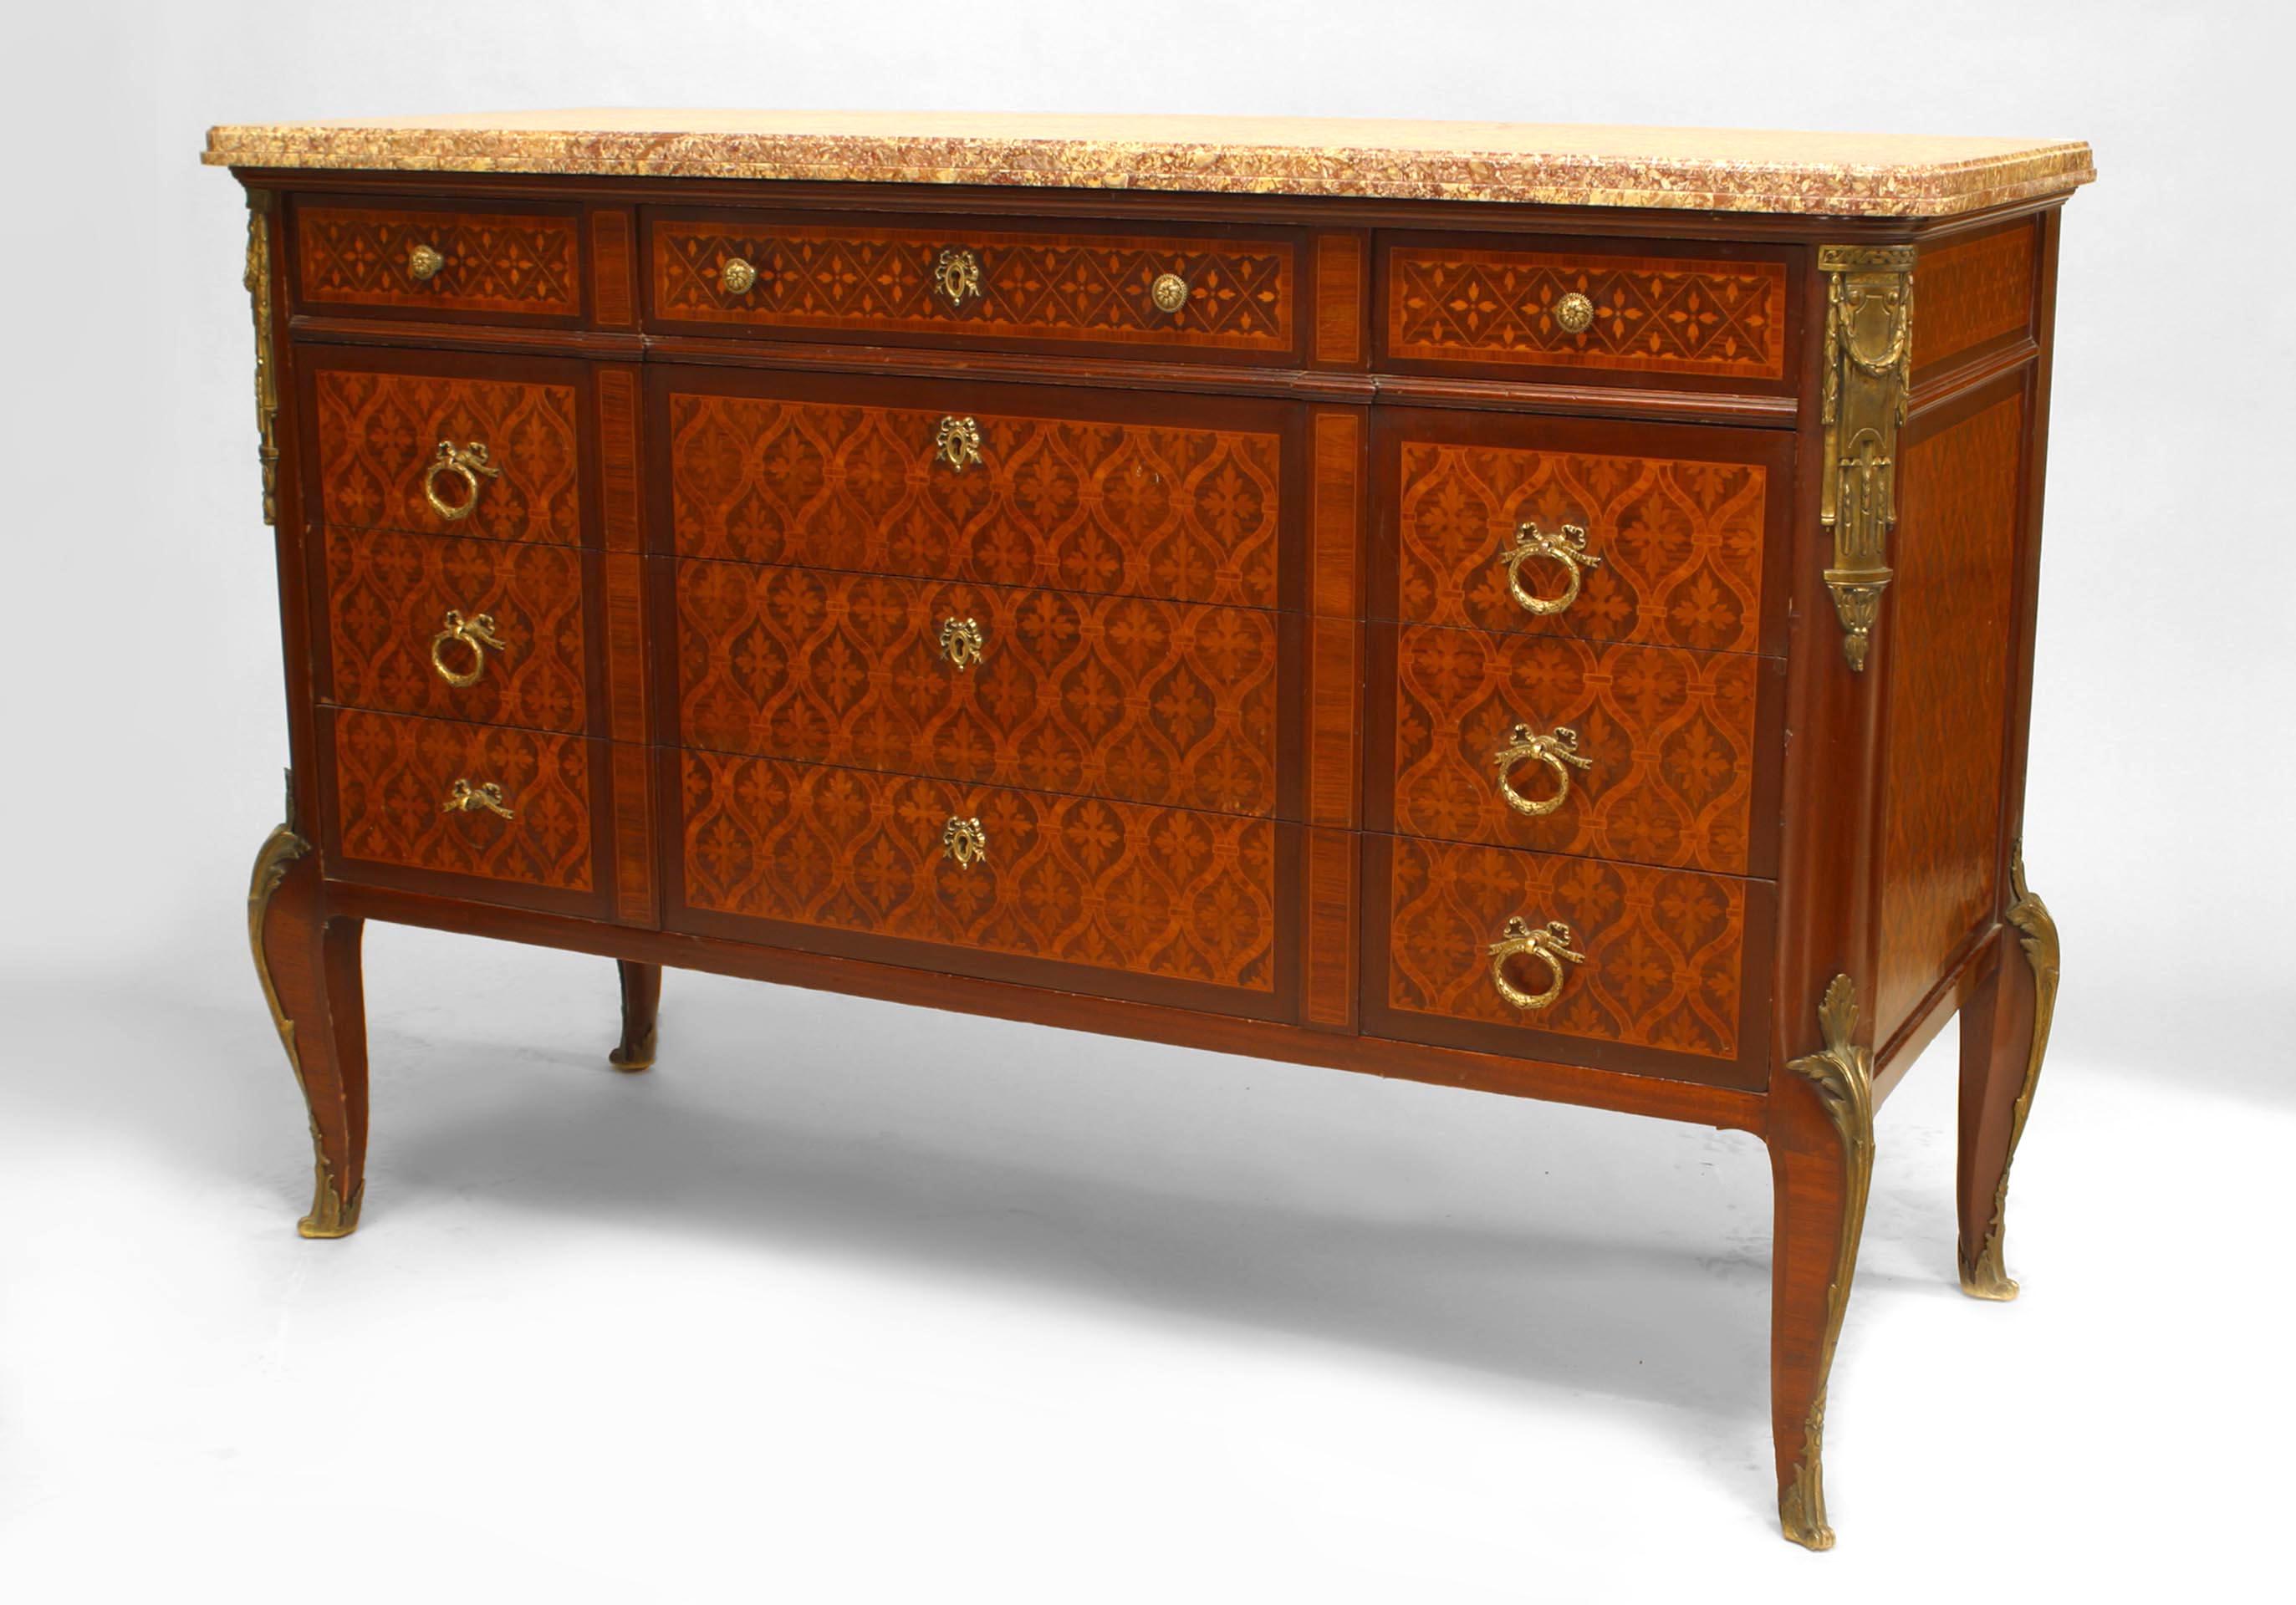 French Louis XVI 6 drawer commode with bronze trim and marquetry inlaid veneer with a marble top.
